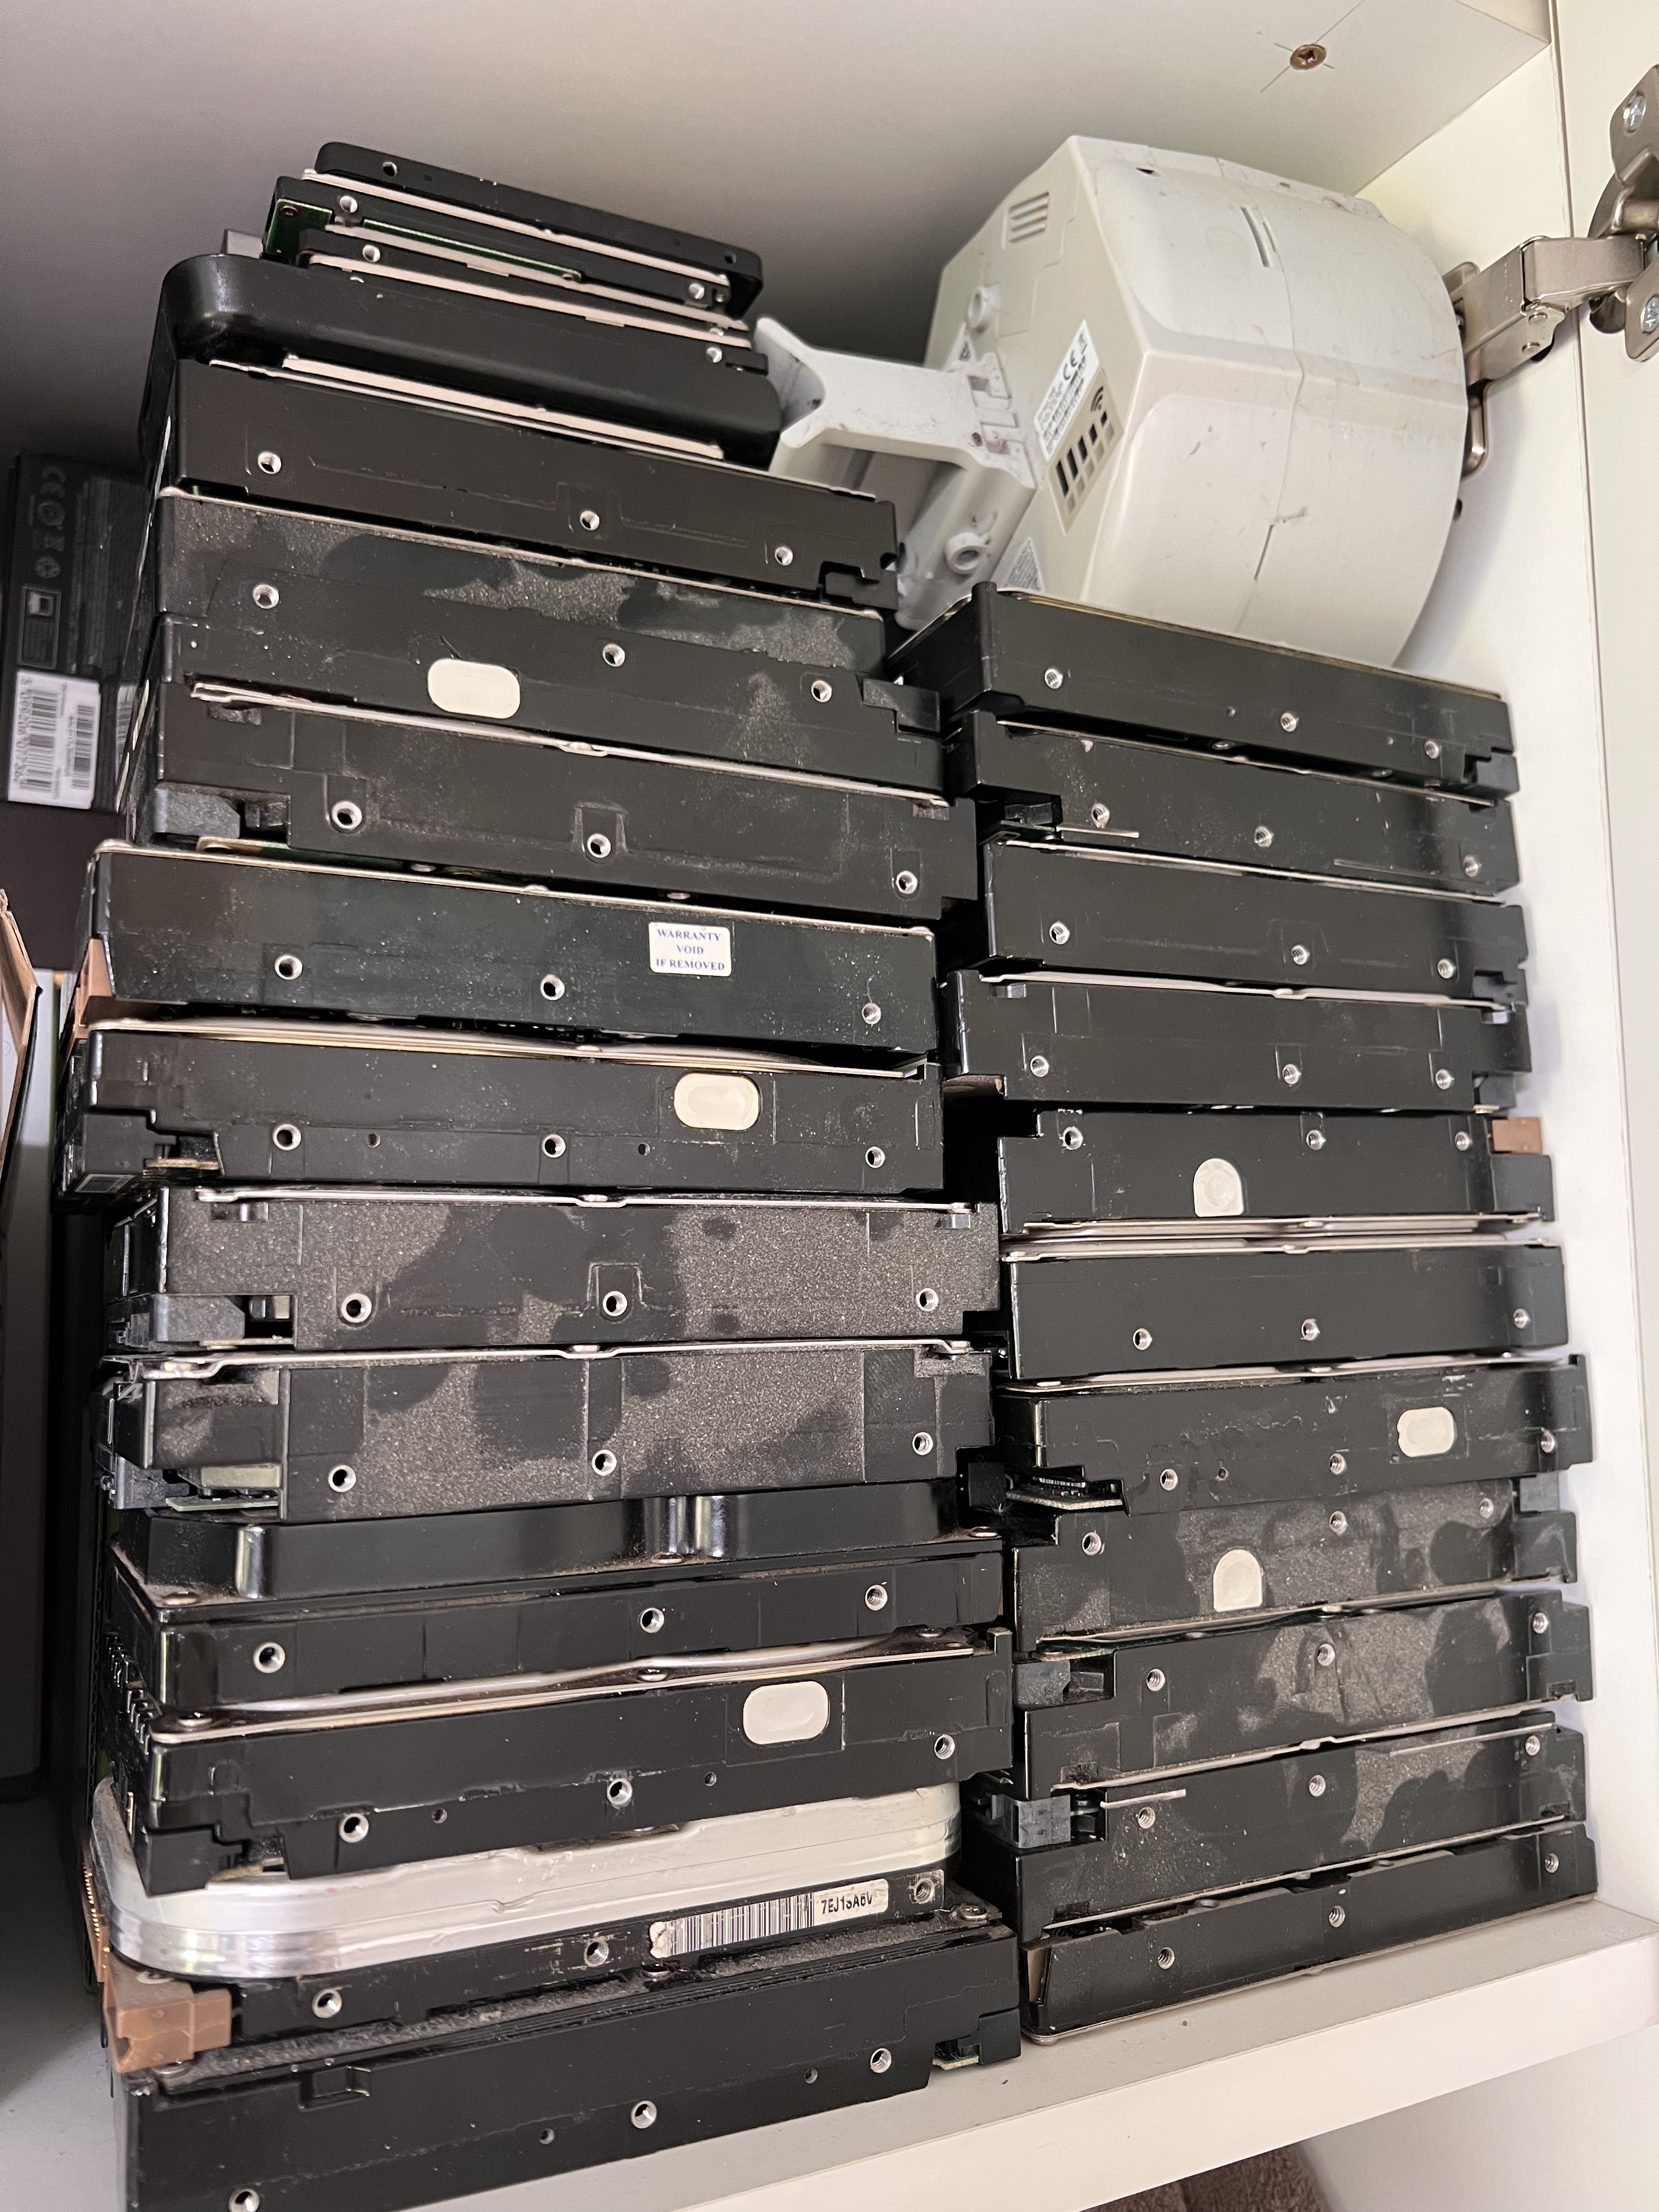 A mega amount of old hard drives in a cupboard